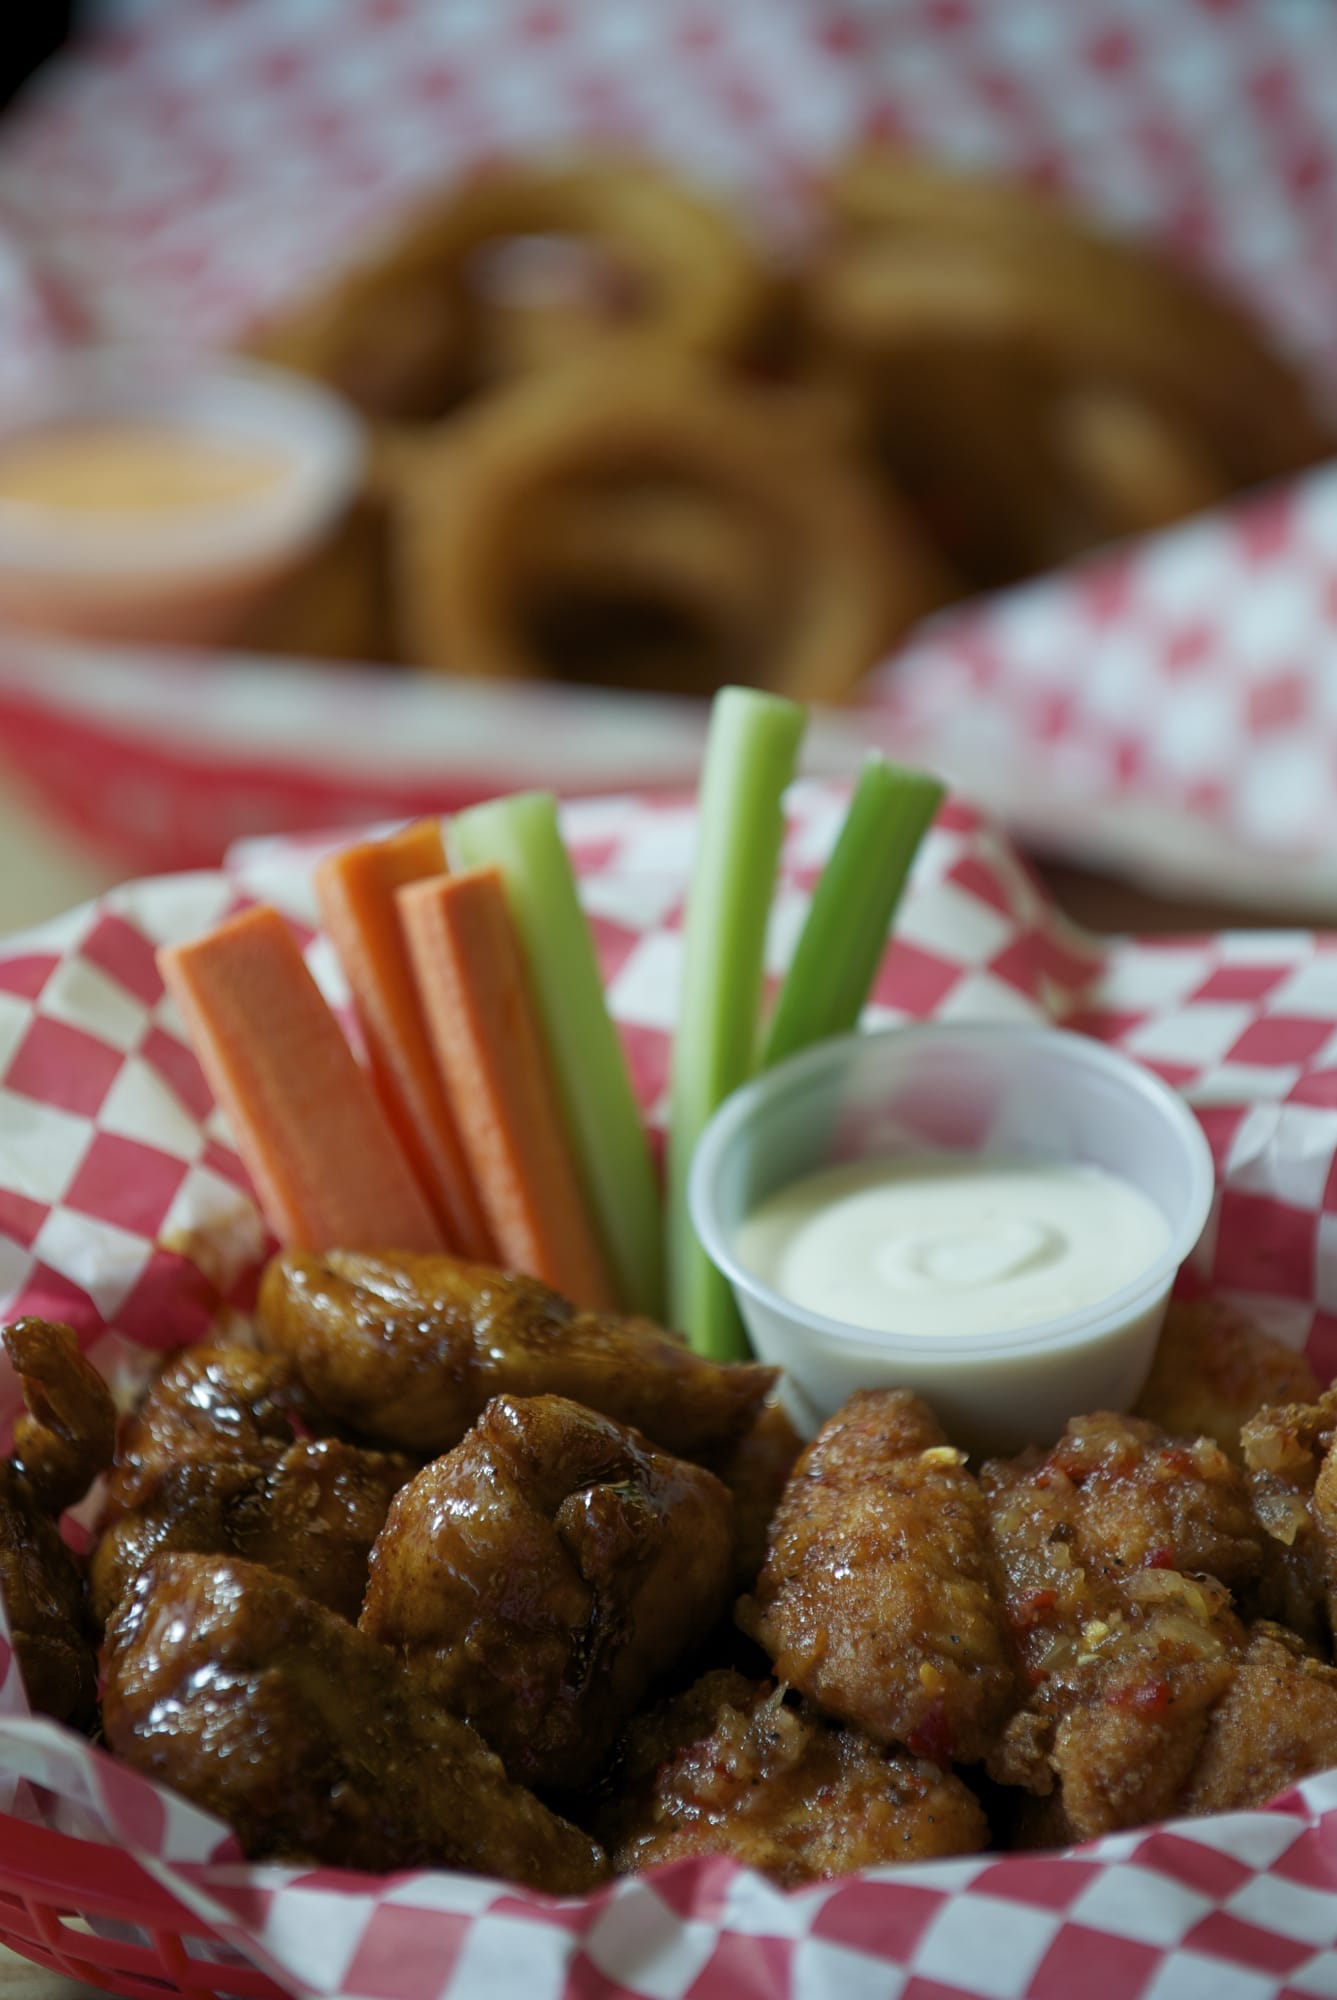 Dining Out: Variety spices up Pow Pow Wings - The Columbian